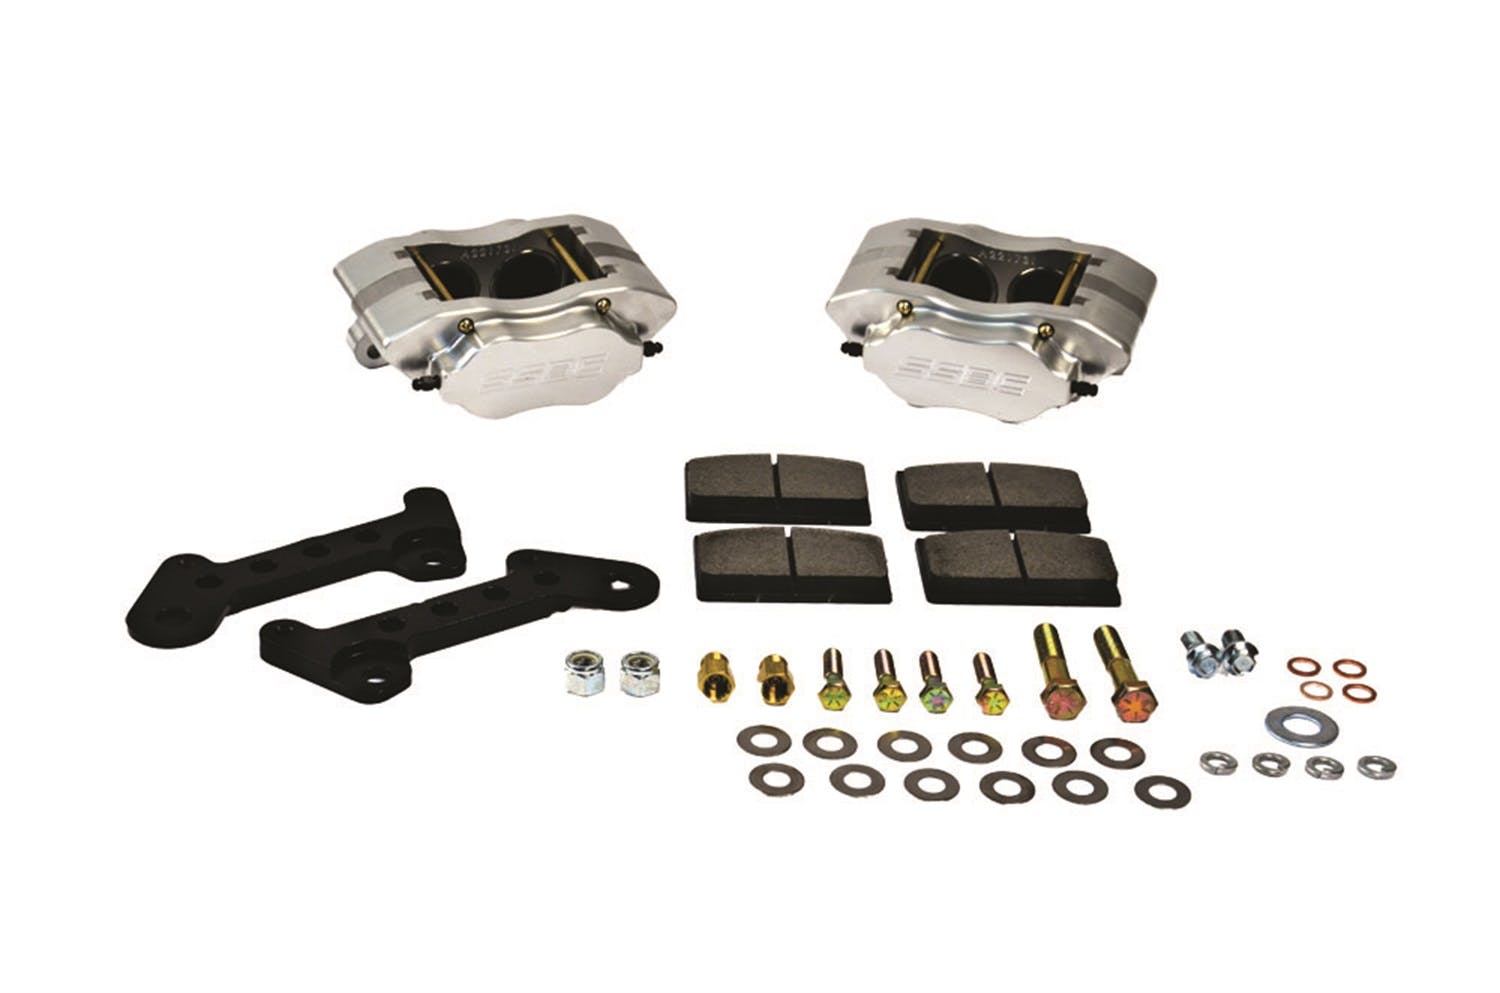 Stainless Steel Brakes A200-1BK Q/C Comp S A200-1 kit w/black calipers